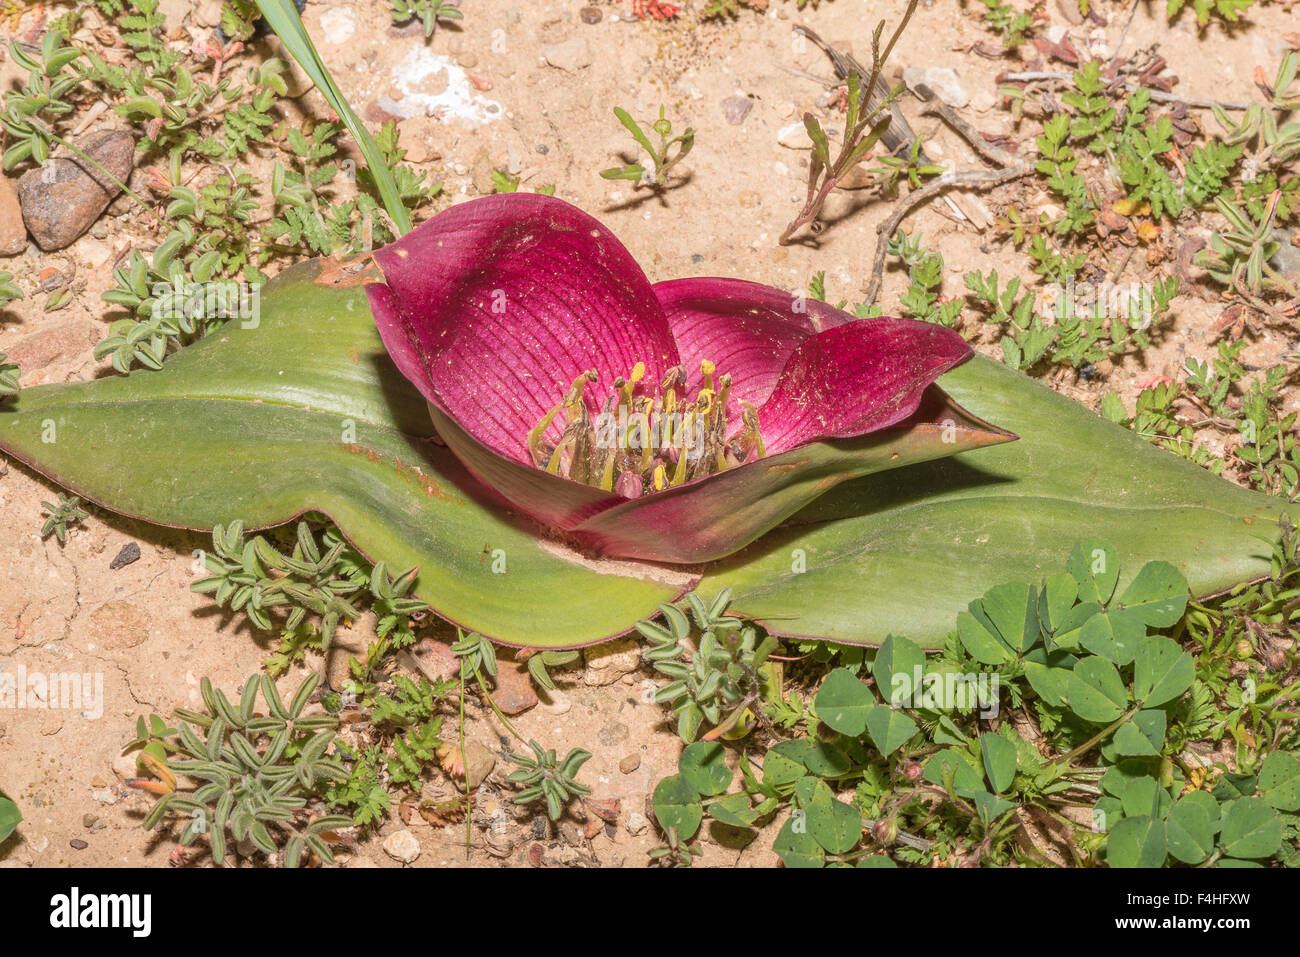 The cup and saucer flower, Colchicum coloratum, at Matjiesfontein farm near Nieuwoudtville Stock Photo